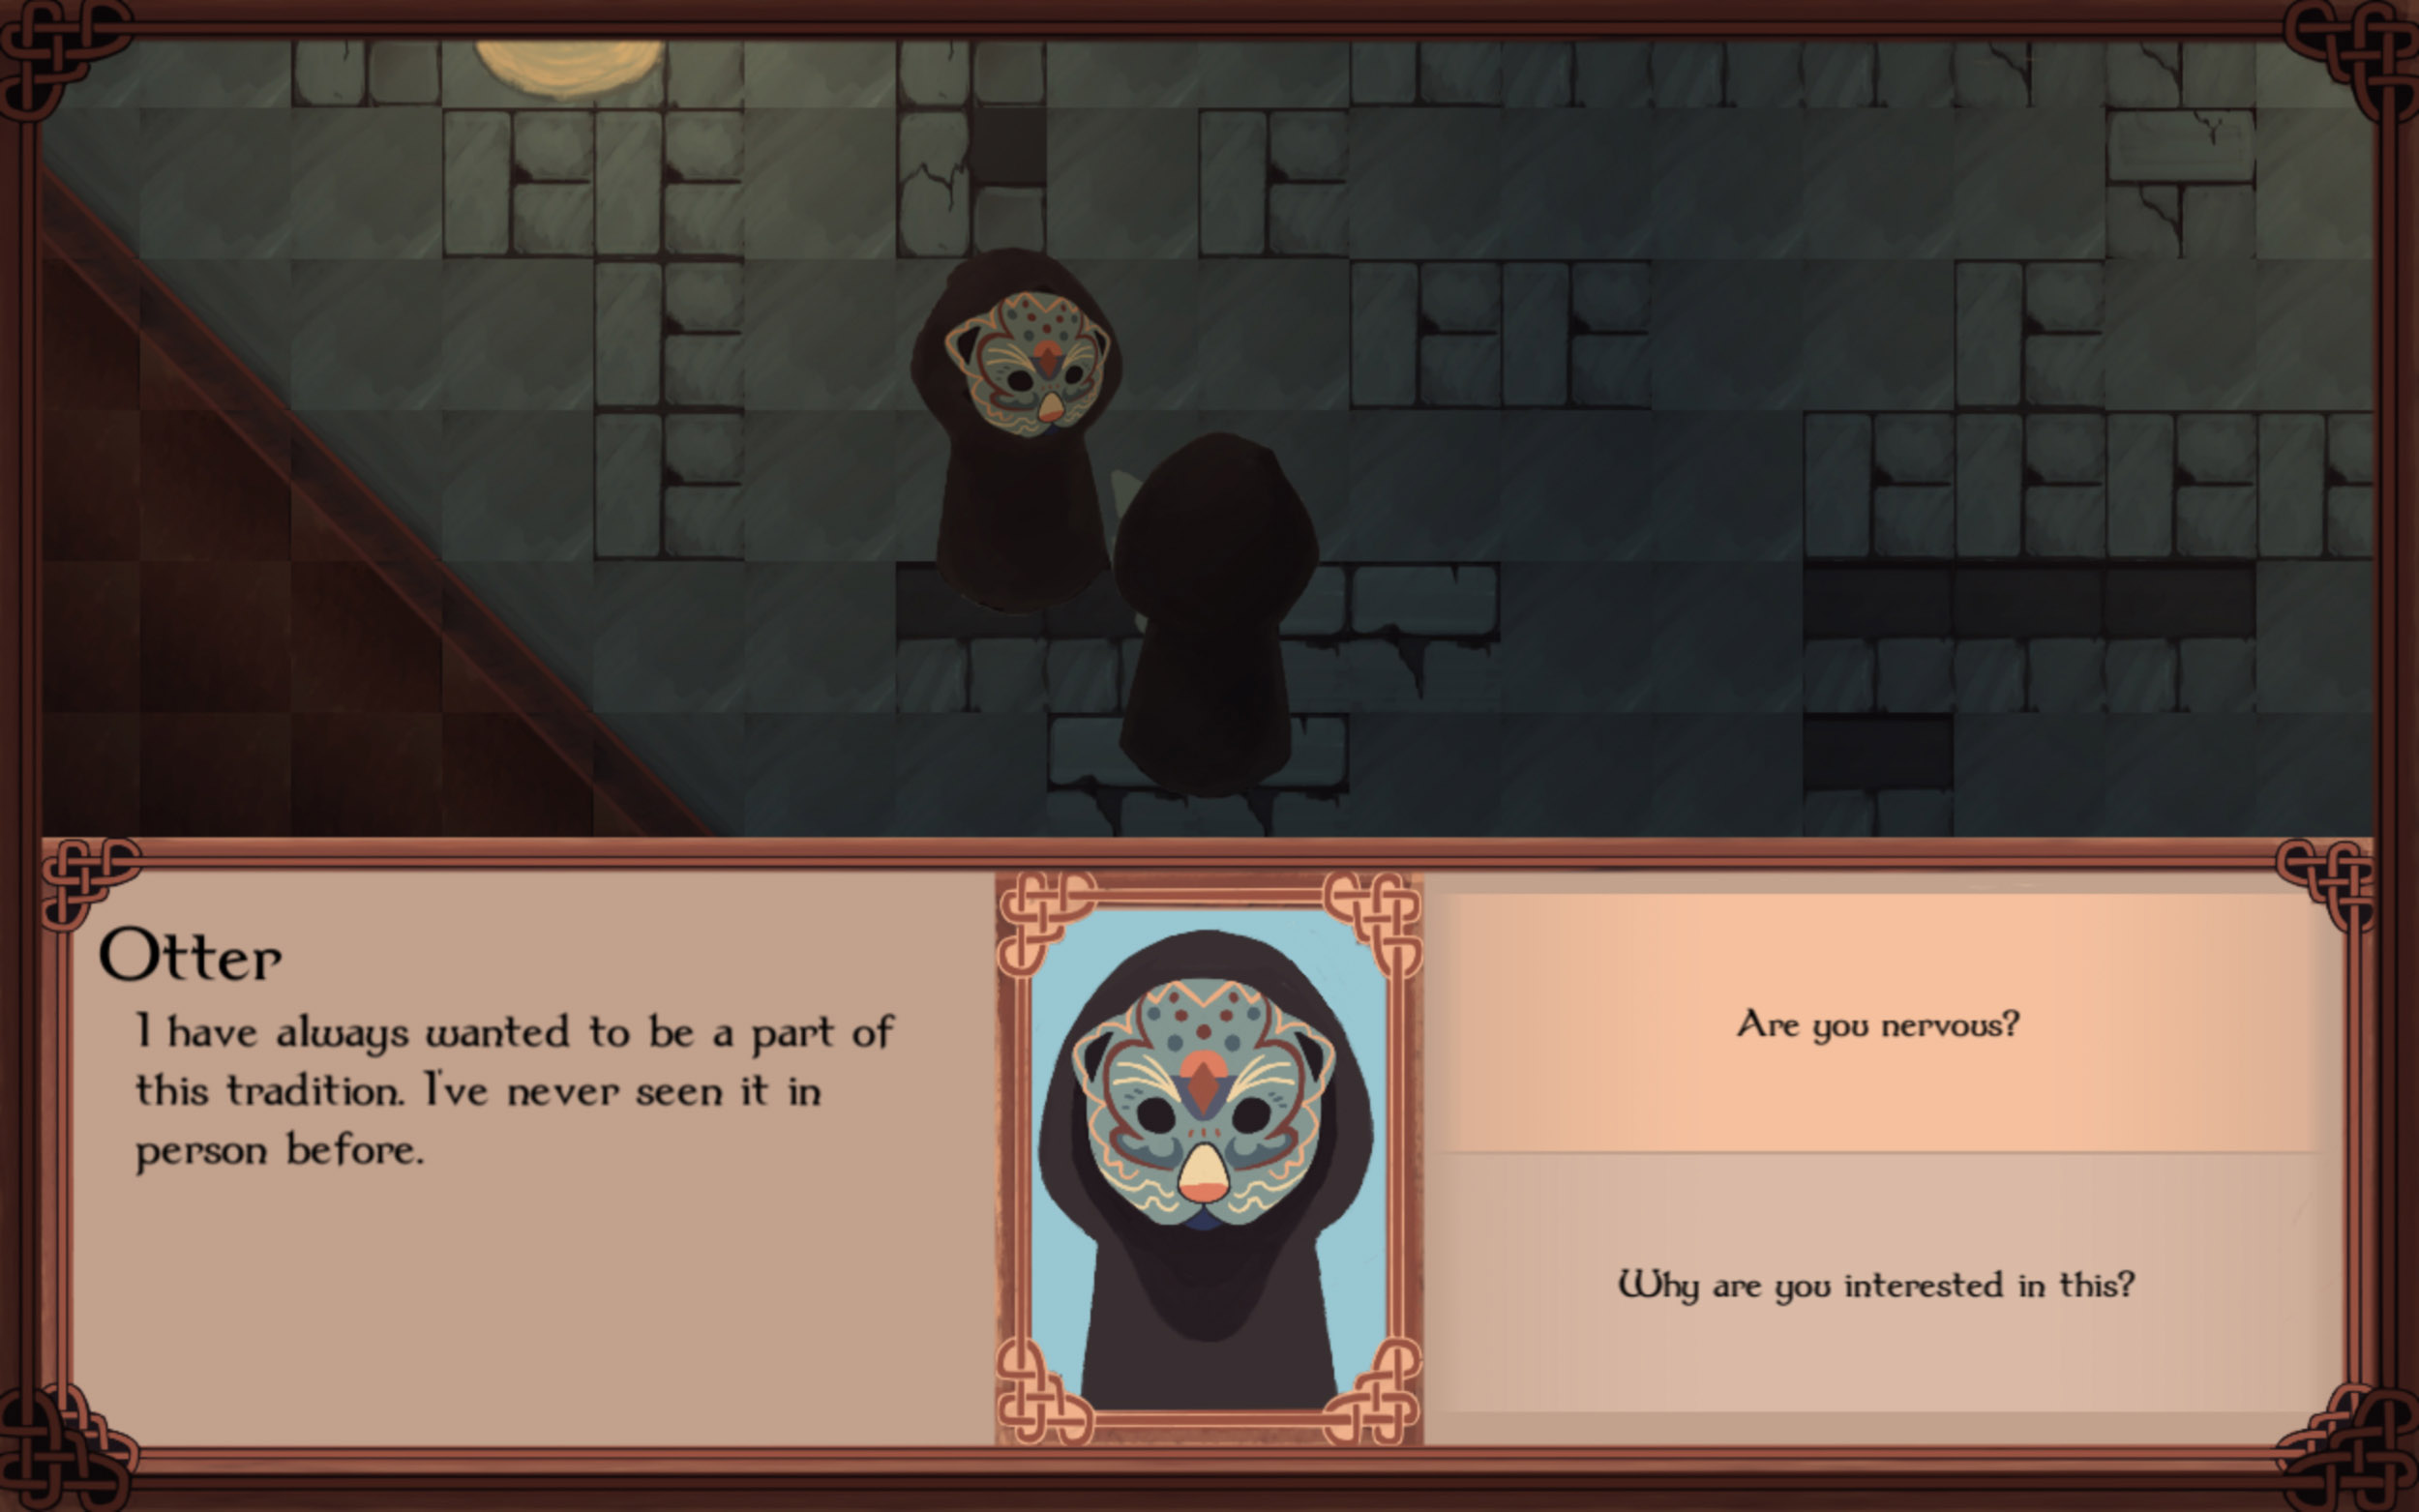 Two cloaked characters talk to one another, with one wearing an otter mask and the other turned away. A dialog box for the masked otter sits at the bottom, reading 'I have always wanted to be a part of this tradition. I've never seen it in person before.' Two dialog options sit to the right, reading 'Are you nervous?' and 'Why are you interested in this?'